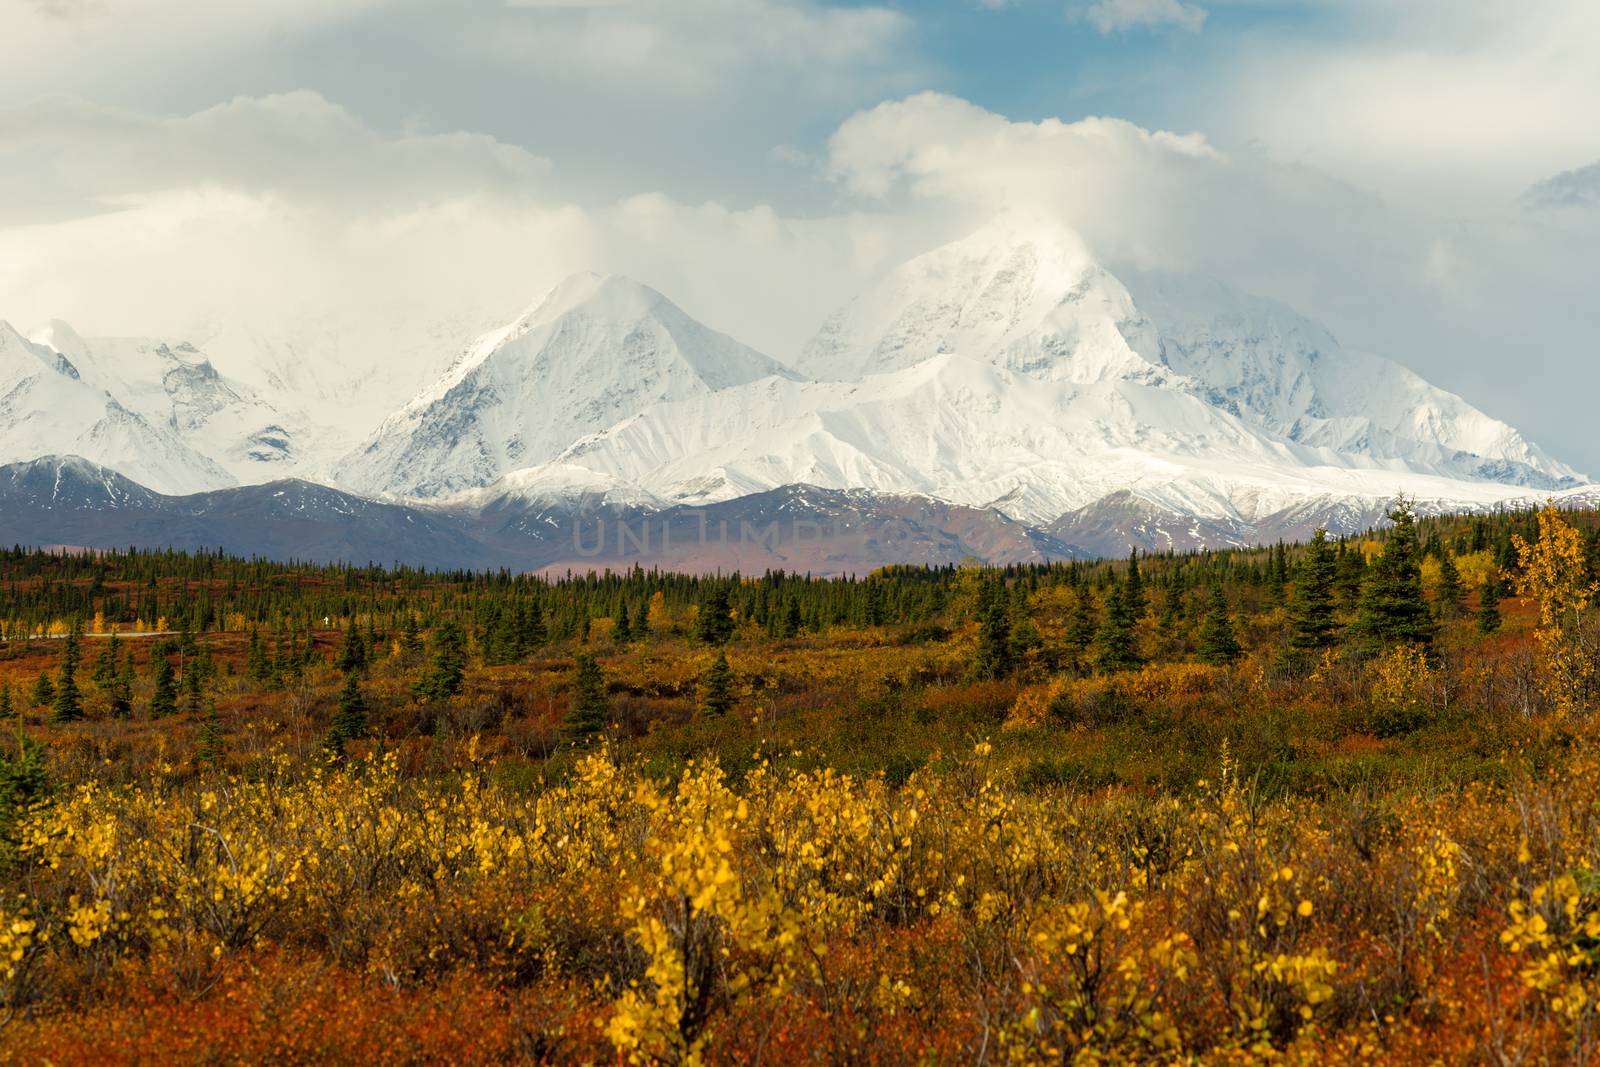 Plants Ground Cover Change Color Alaska Mountains Autumn Season by ChrisBoswell